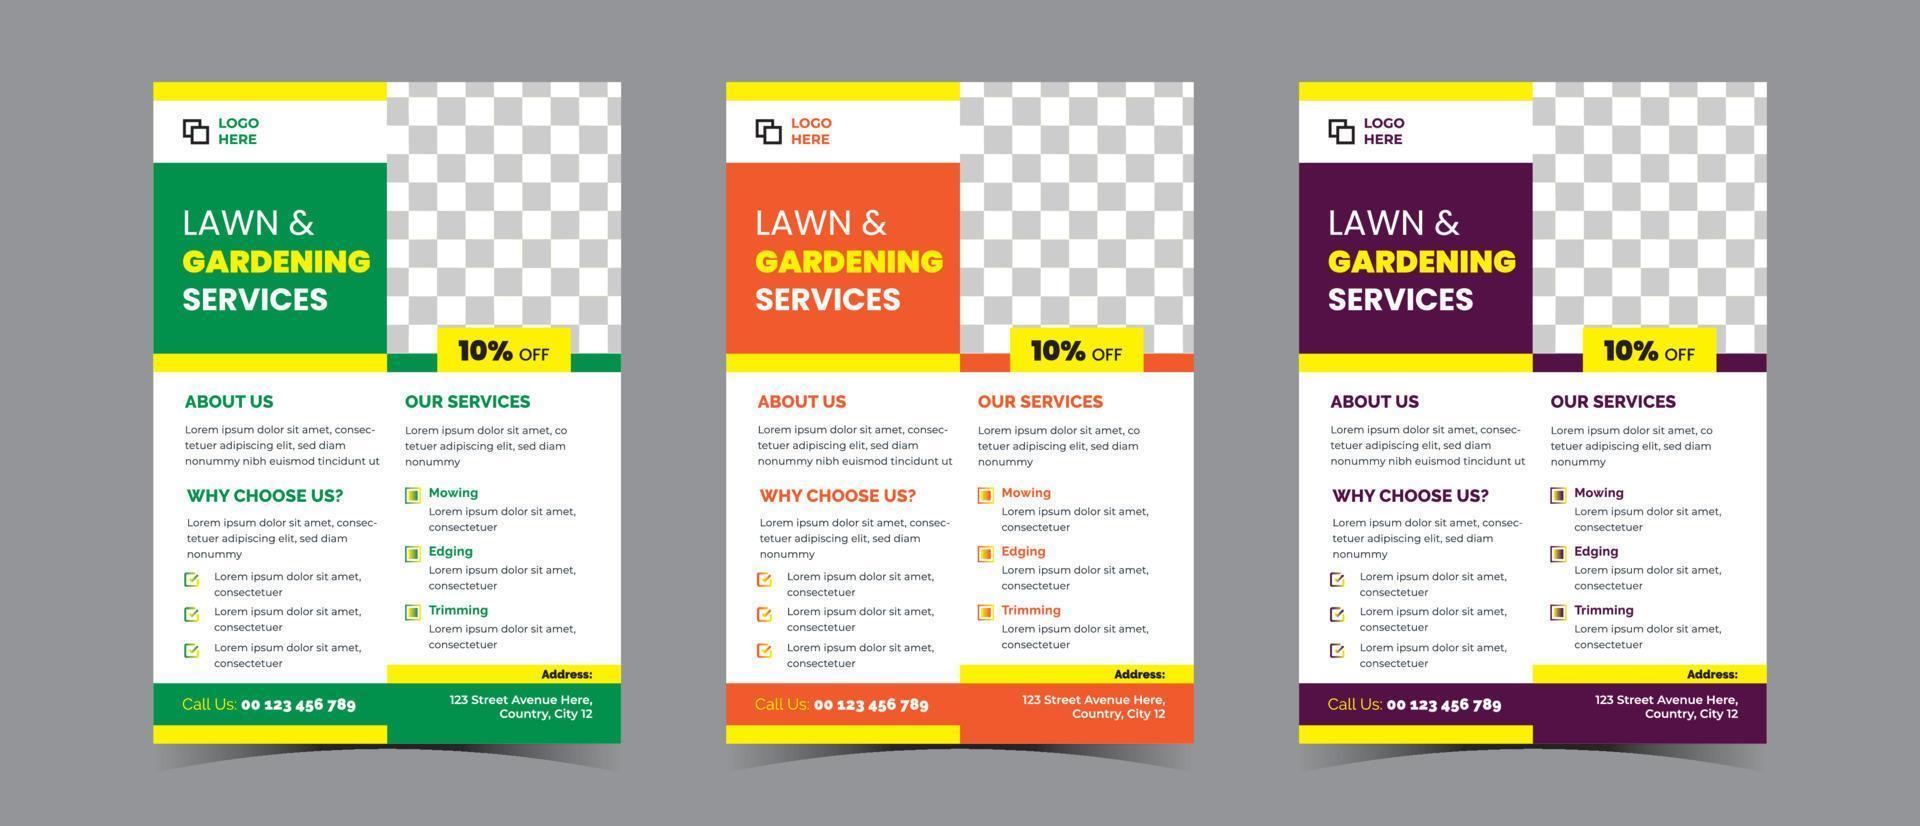 Lawn and gardening services flyer concept template vector